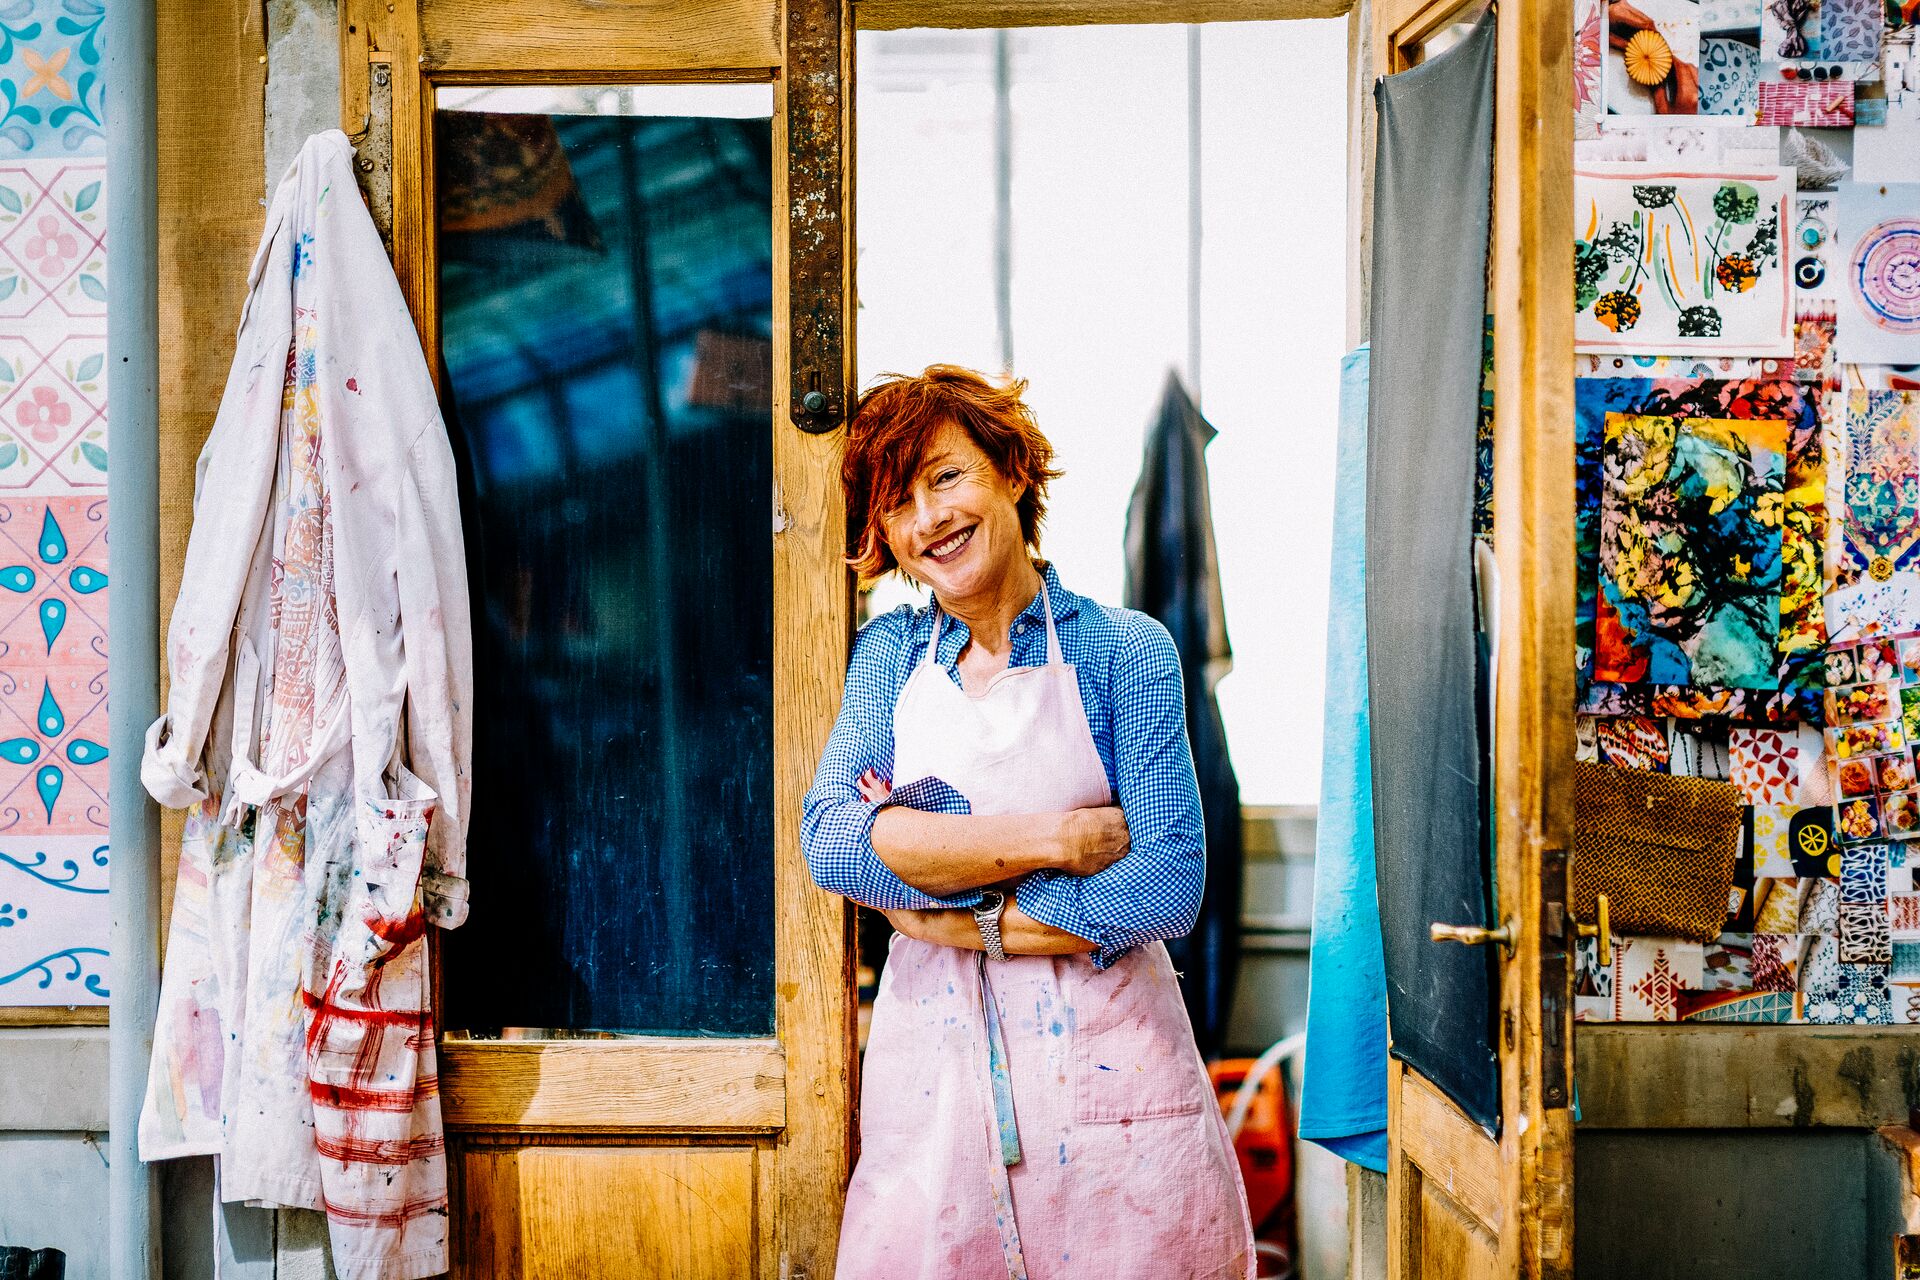 Large_MS PPT_Web-A cheerful woman with red hair in an apron smiles at the camera and rests against the door in her art studio.jpg